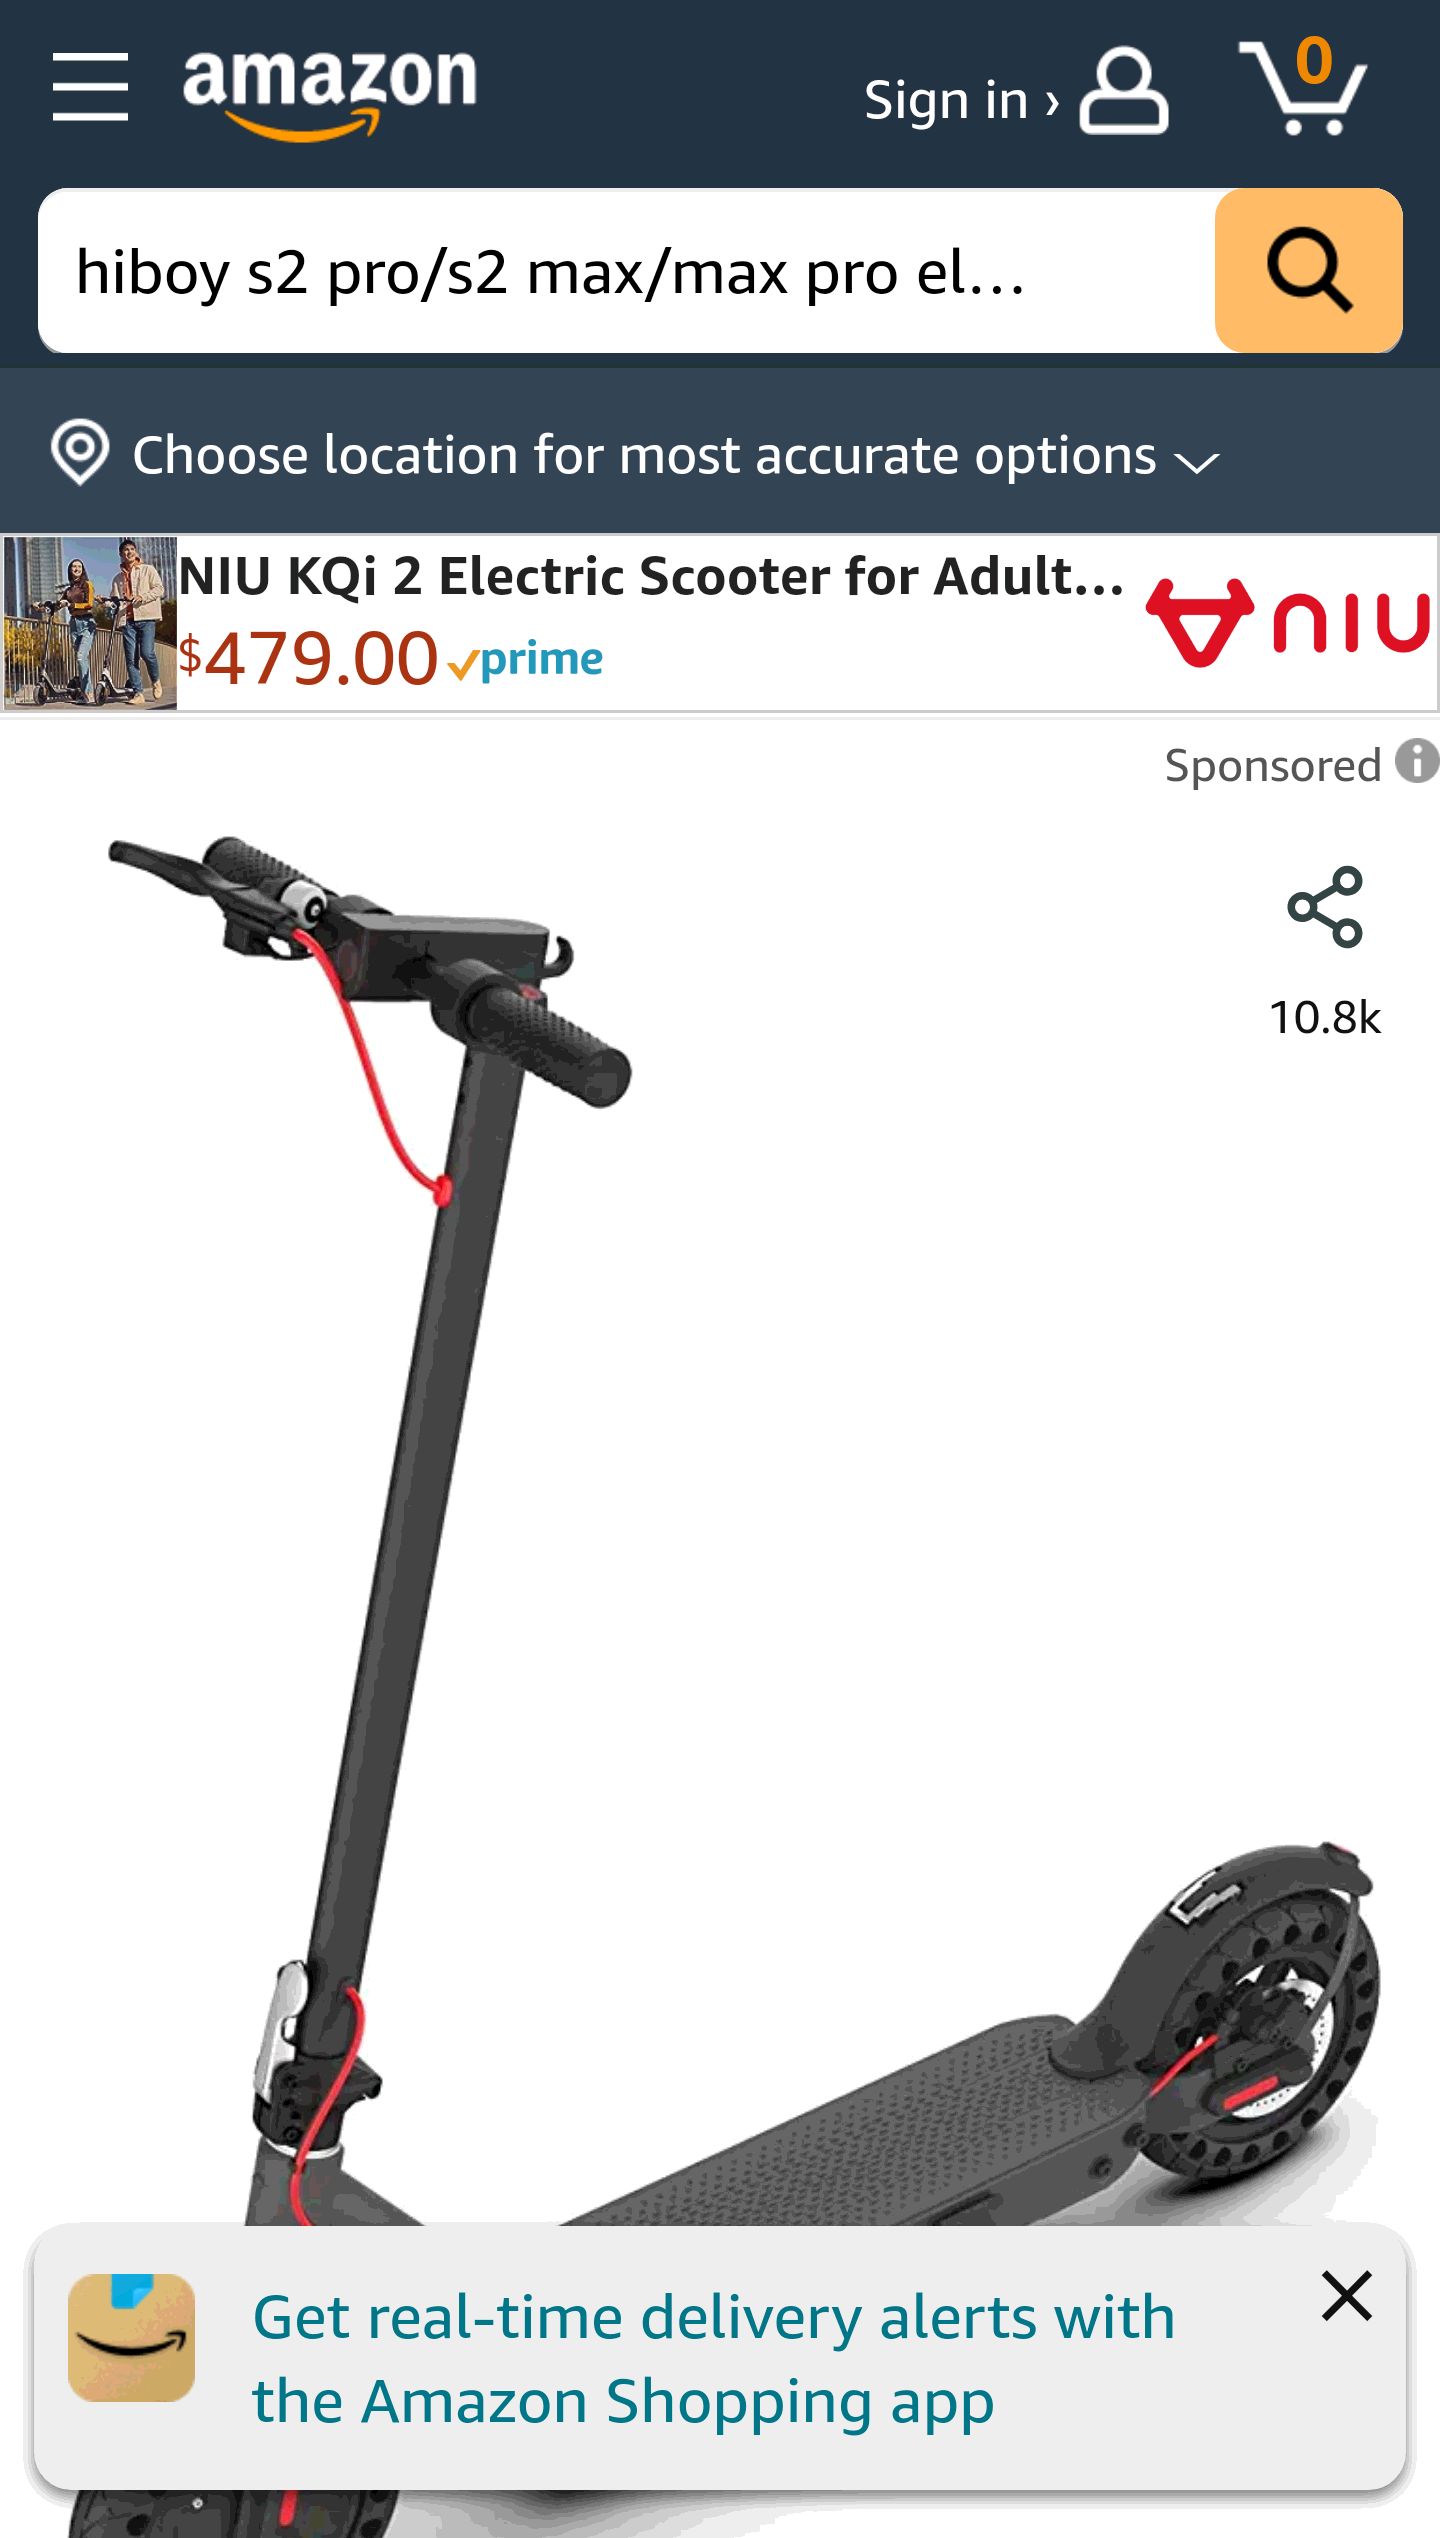 Amazon.com : Hiboy S2 Pro Electric Scooter, 500W Motor, 10" Solid Tires, 25 Miles Range, 19 Mph Folding Commuter Electric Scooter for Adults : Sports & Outdoors